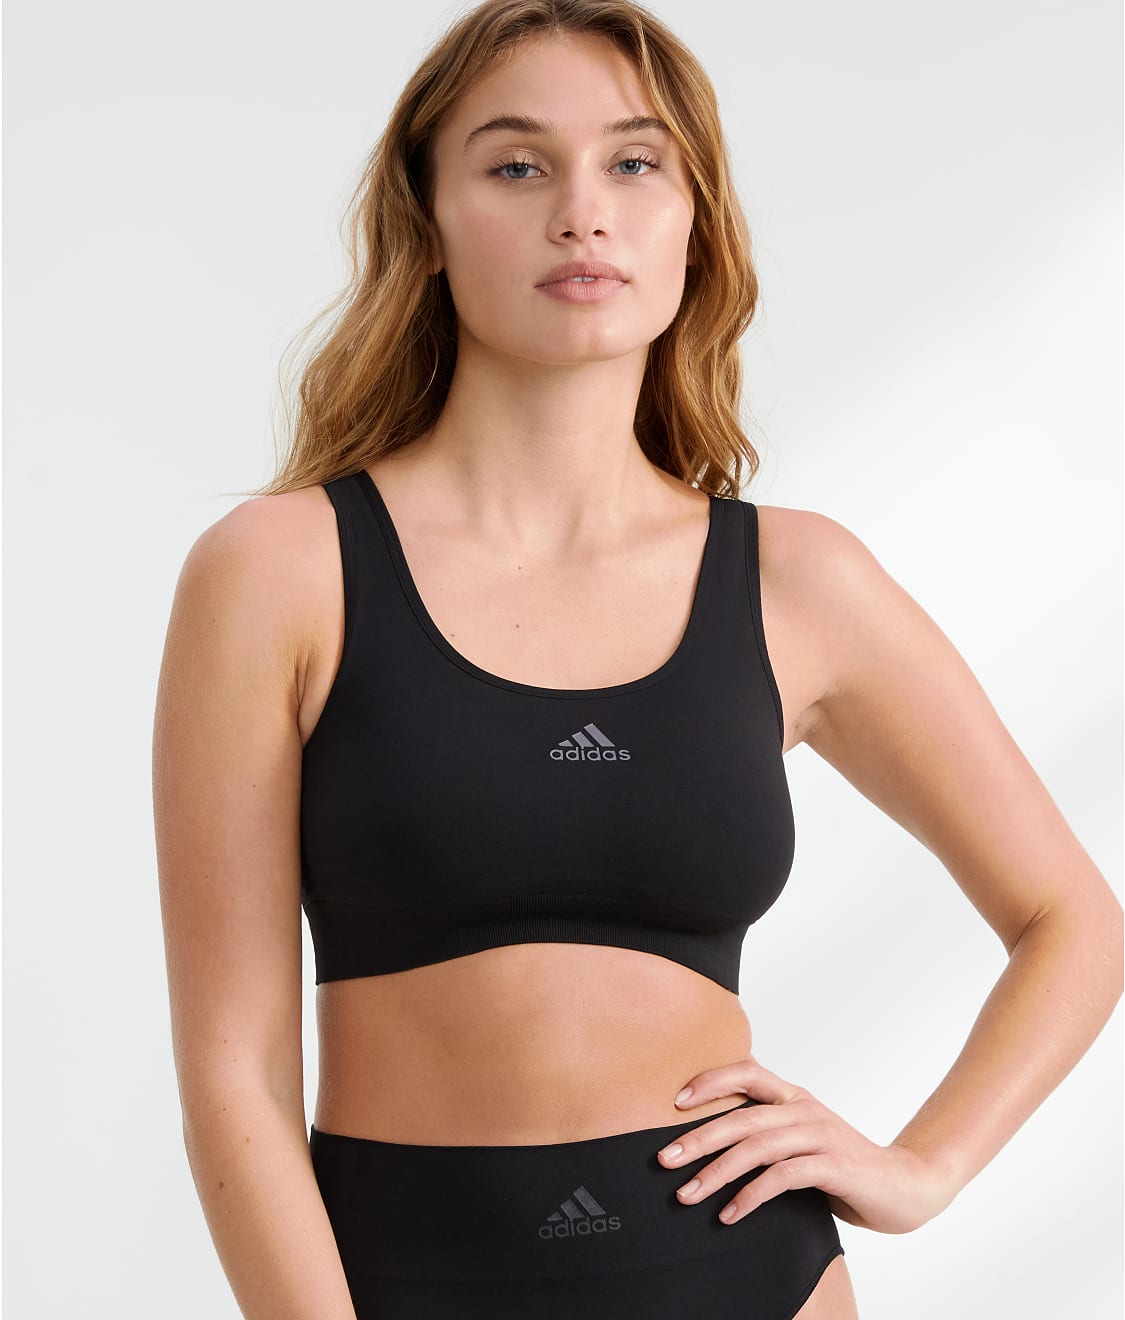 Adidas: Seamless Scoop Lounge Bralette 4A7H67